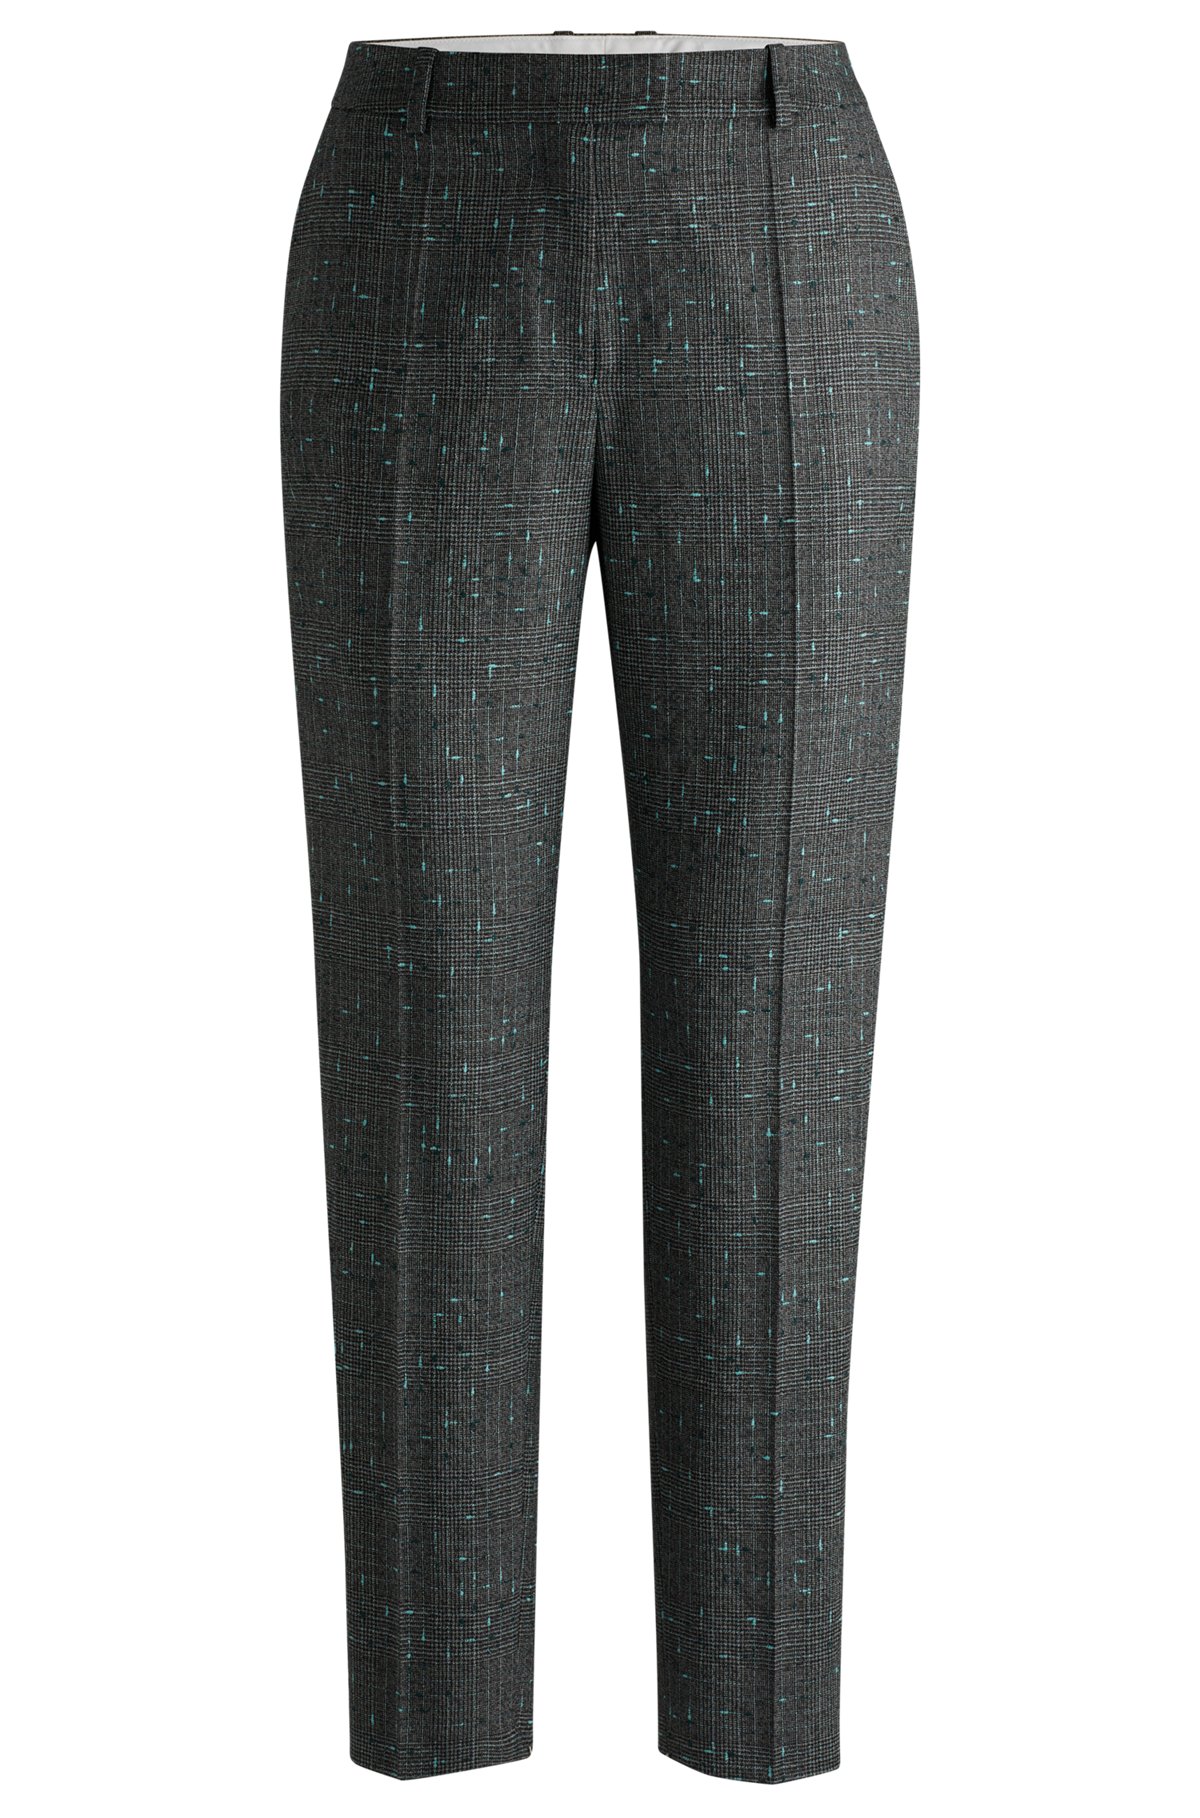 BOSS - Regular-fit trousers in a checked virgin-wool blend